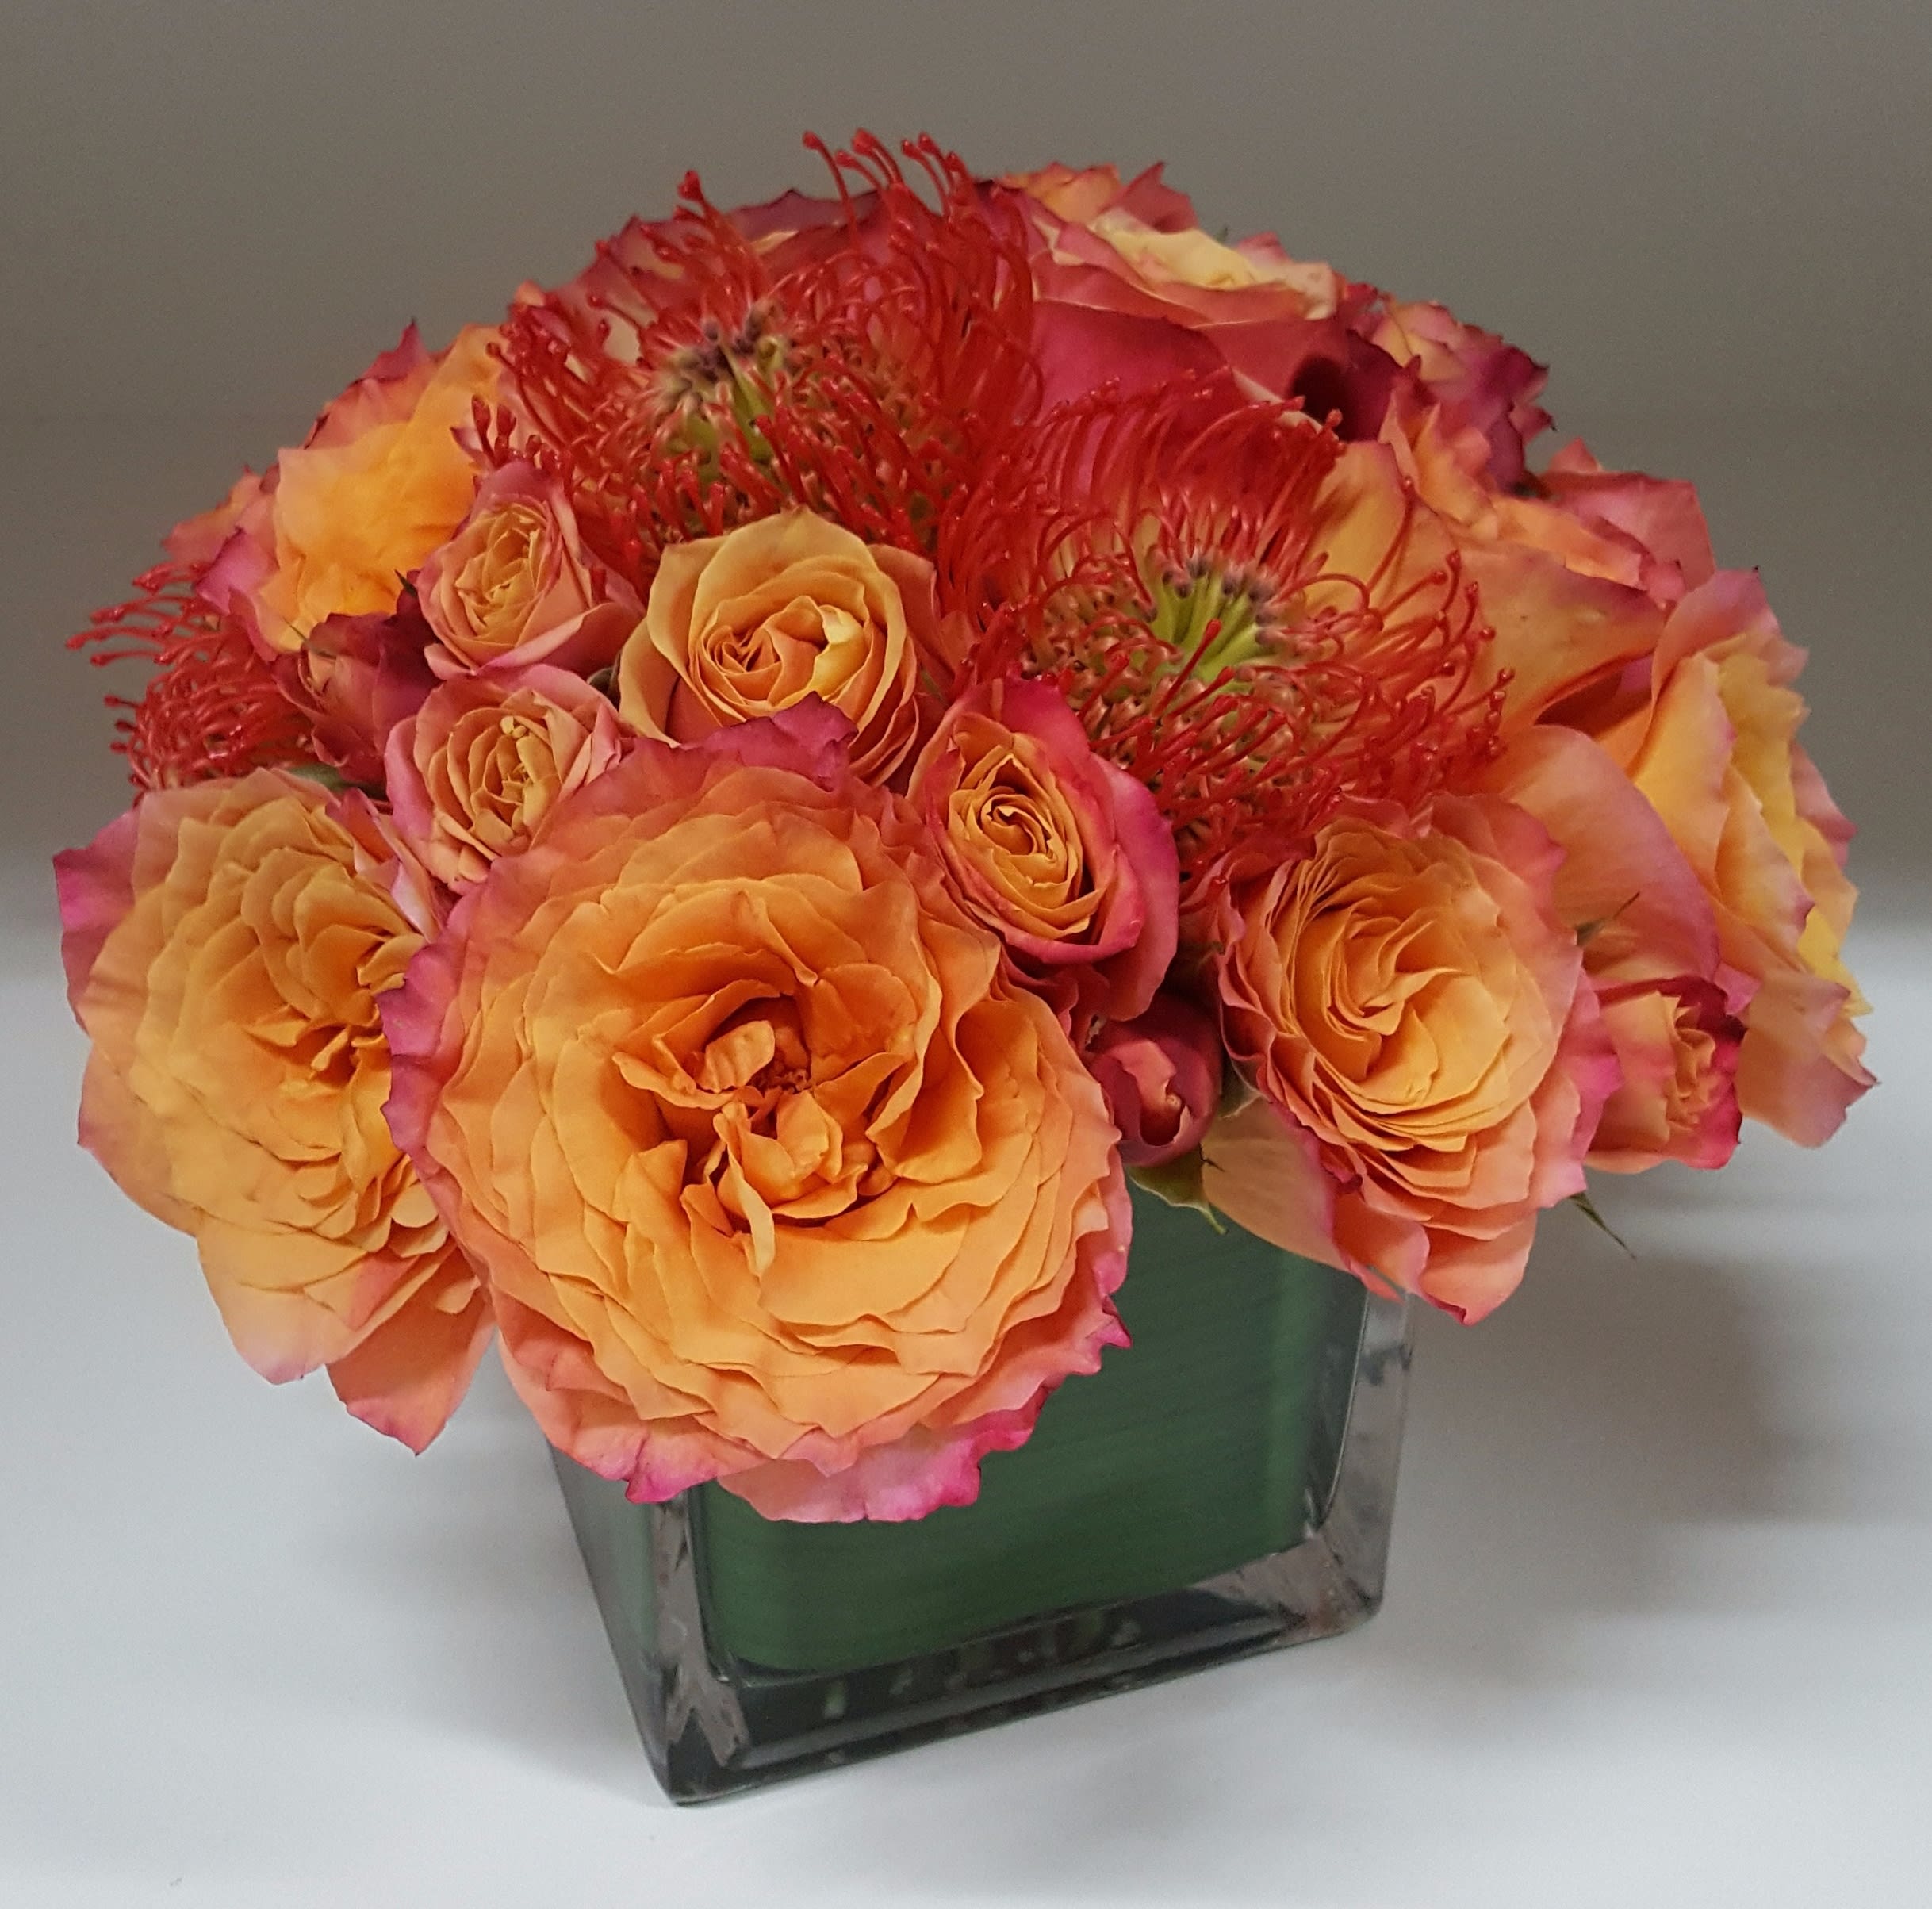 Calypso - Fiery medley of gorgeous cherry brandy and orange spray roses complemented by the textured look of orange protea pin cushions makes a lovely seasonal gift. All arranged in 5”x 5” leaf lined clear cube. Approximate dimensions: 11”x 10”